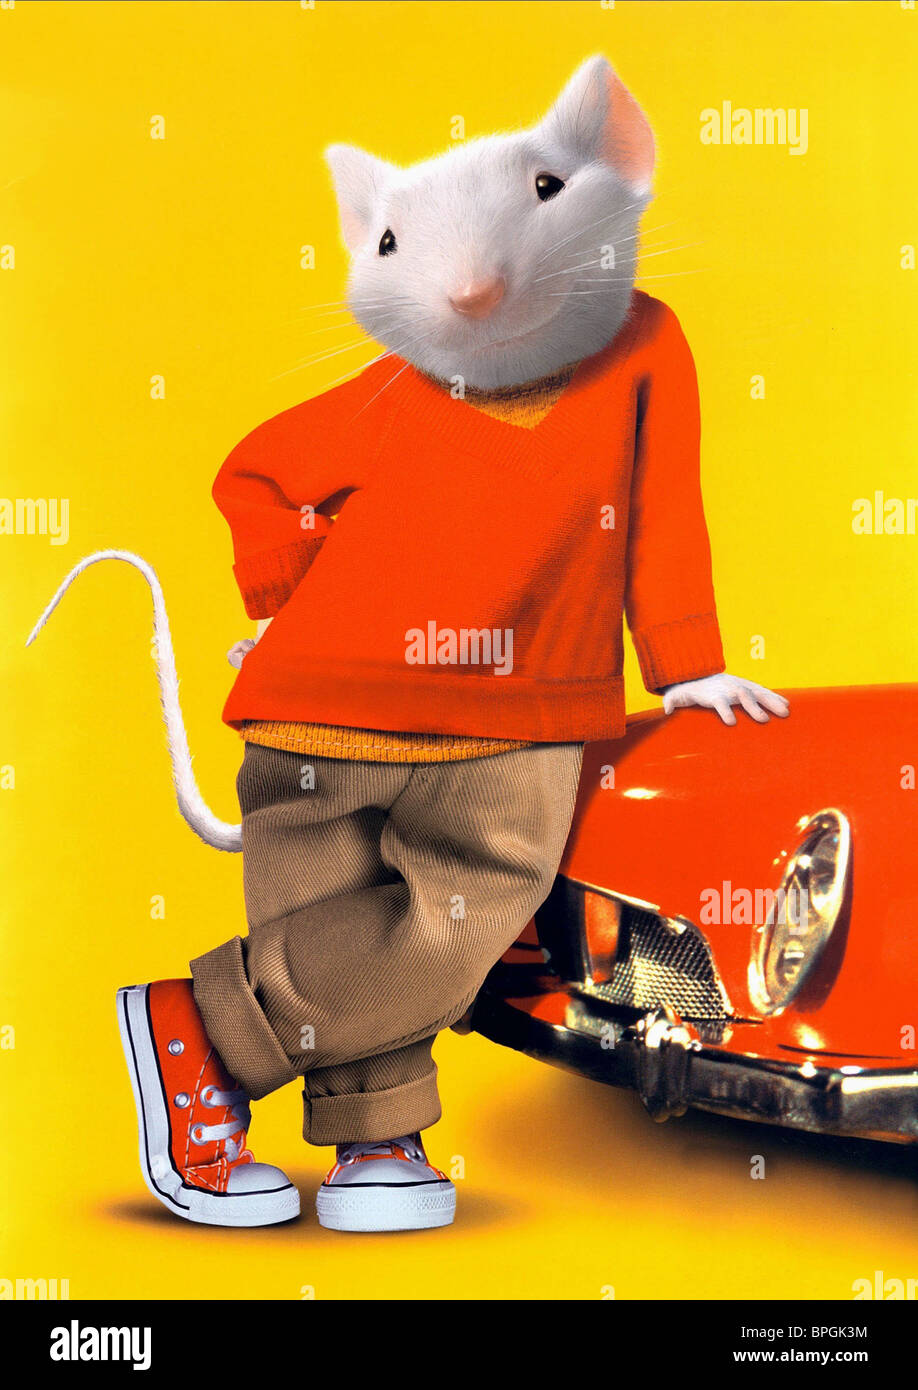 Stuart Little (character)/Gallery | Sony Pictures Entertaiment ...